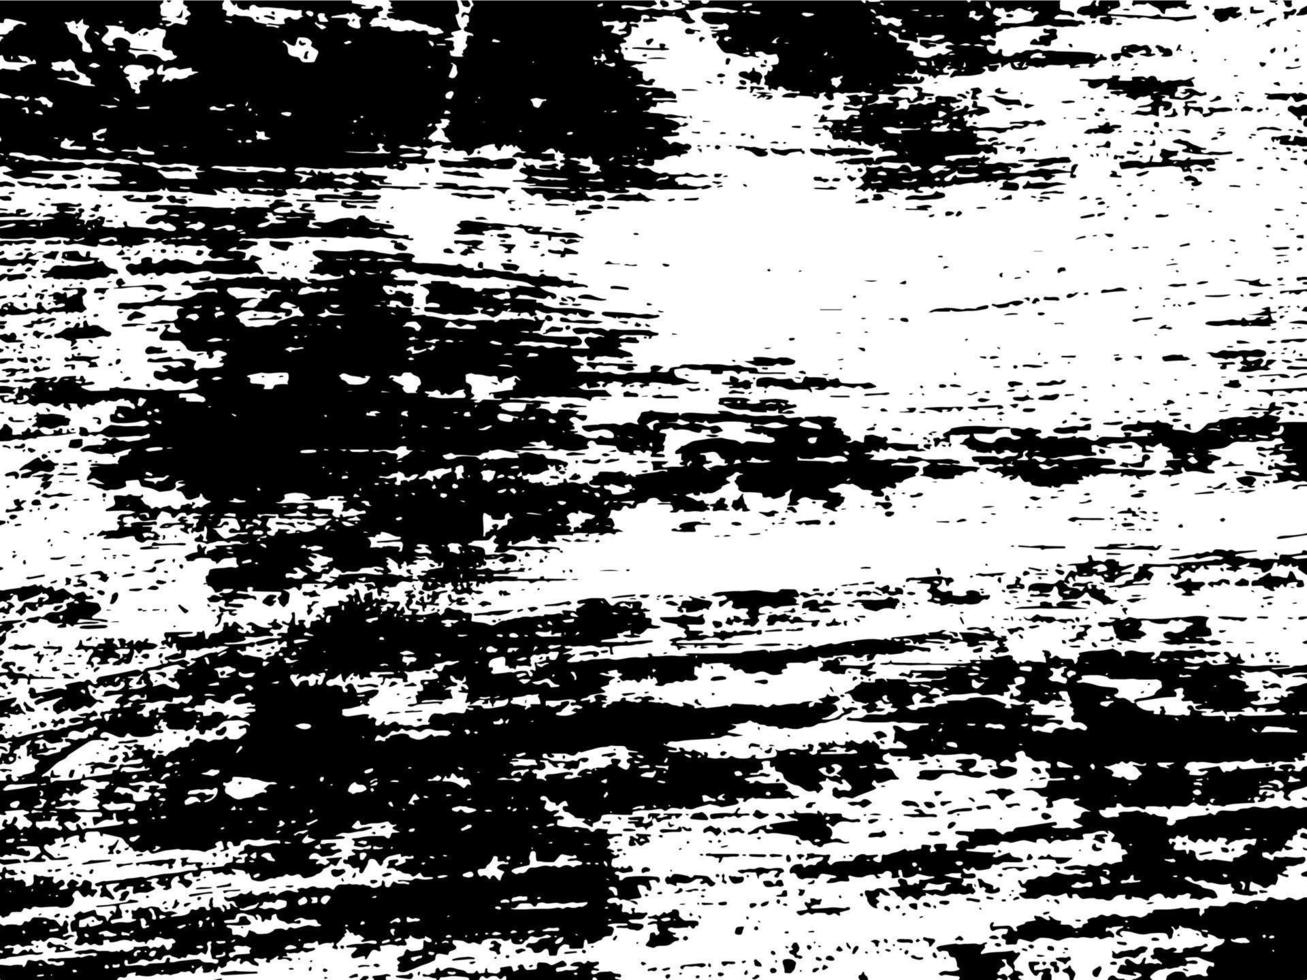 Grunge natural wood monochrome texture. Abstract wooden surface overlay background in black and white. Vector illustration